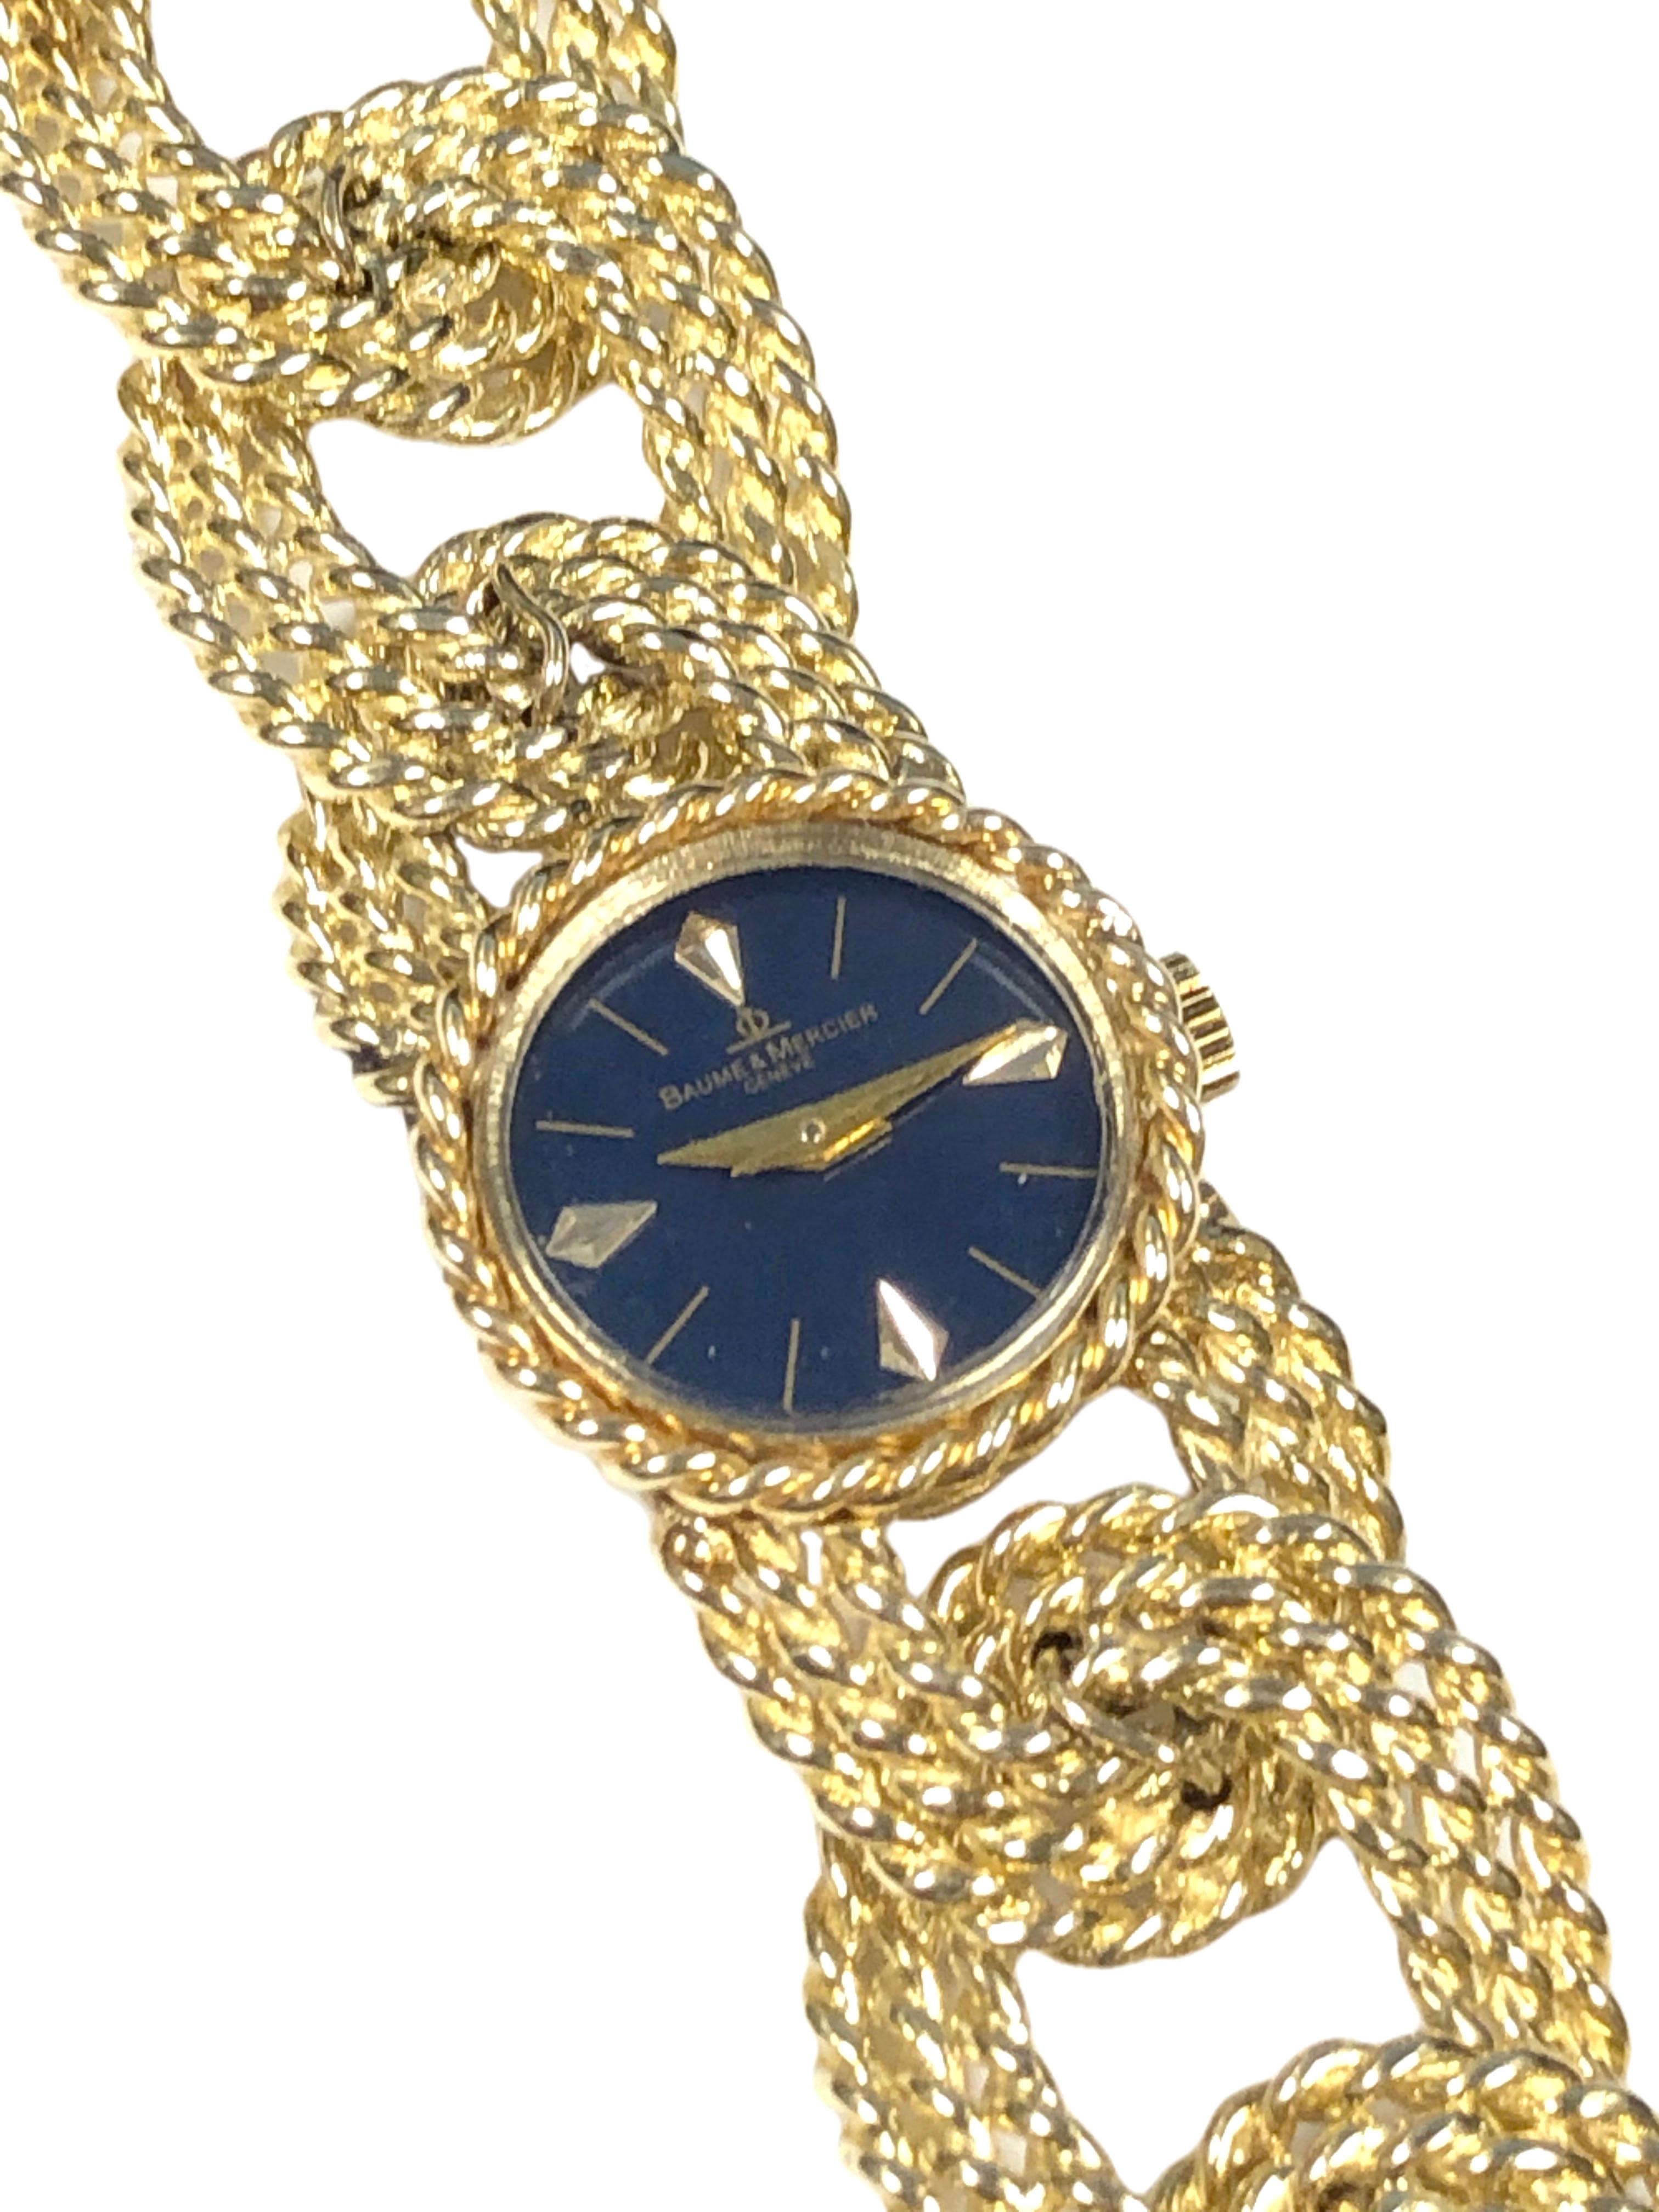 Circa 1960s Baum & Mericer Ladies Bracelet Wrist Watch, 20 M.M. 14K yellow Gold 2 Piece case with a Twisted Rope design bezel, 17 Jewel, Mechanical, Manual wind movement. Navy Blue Enamel dial with raised Gold markers. Twisted Rope design